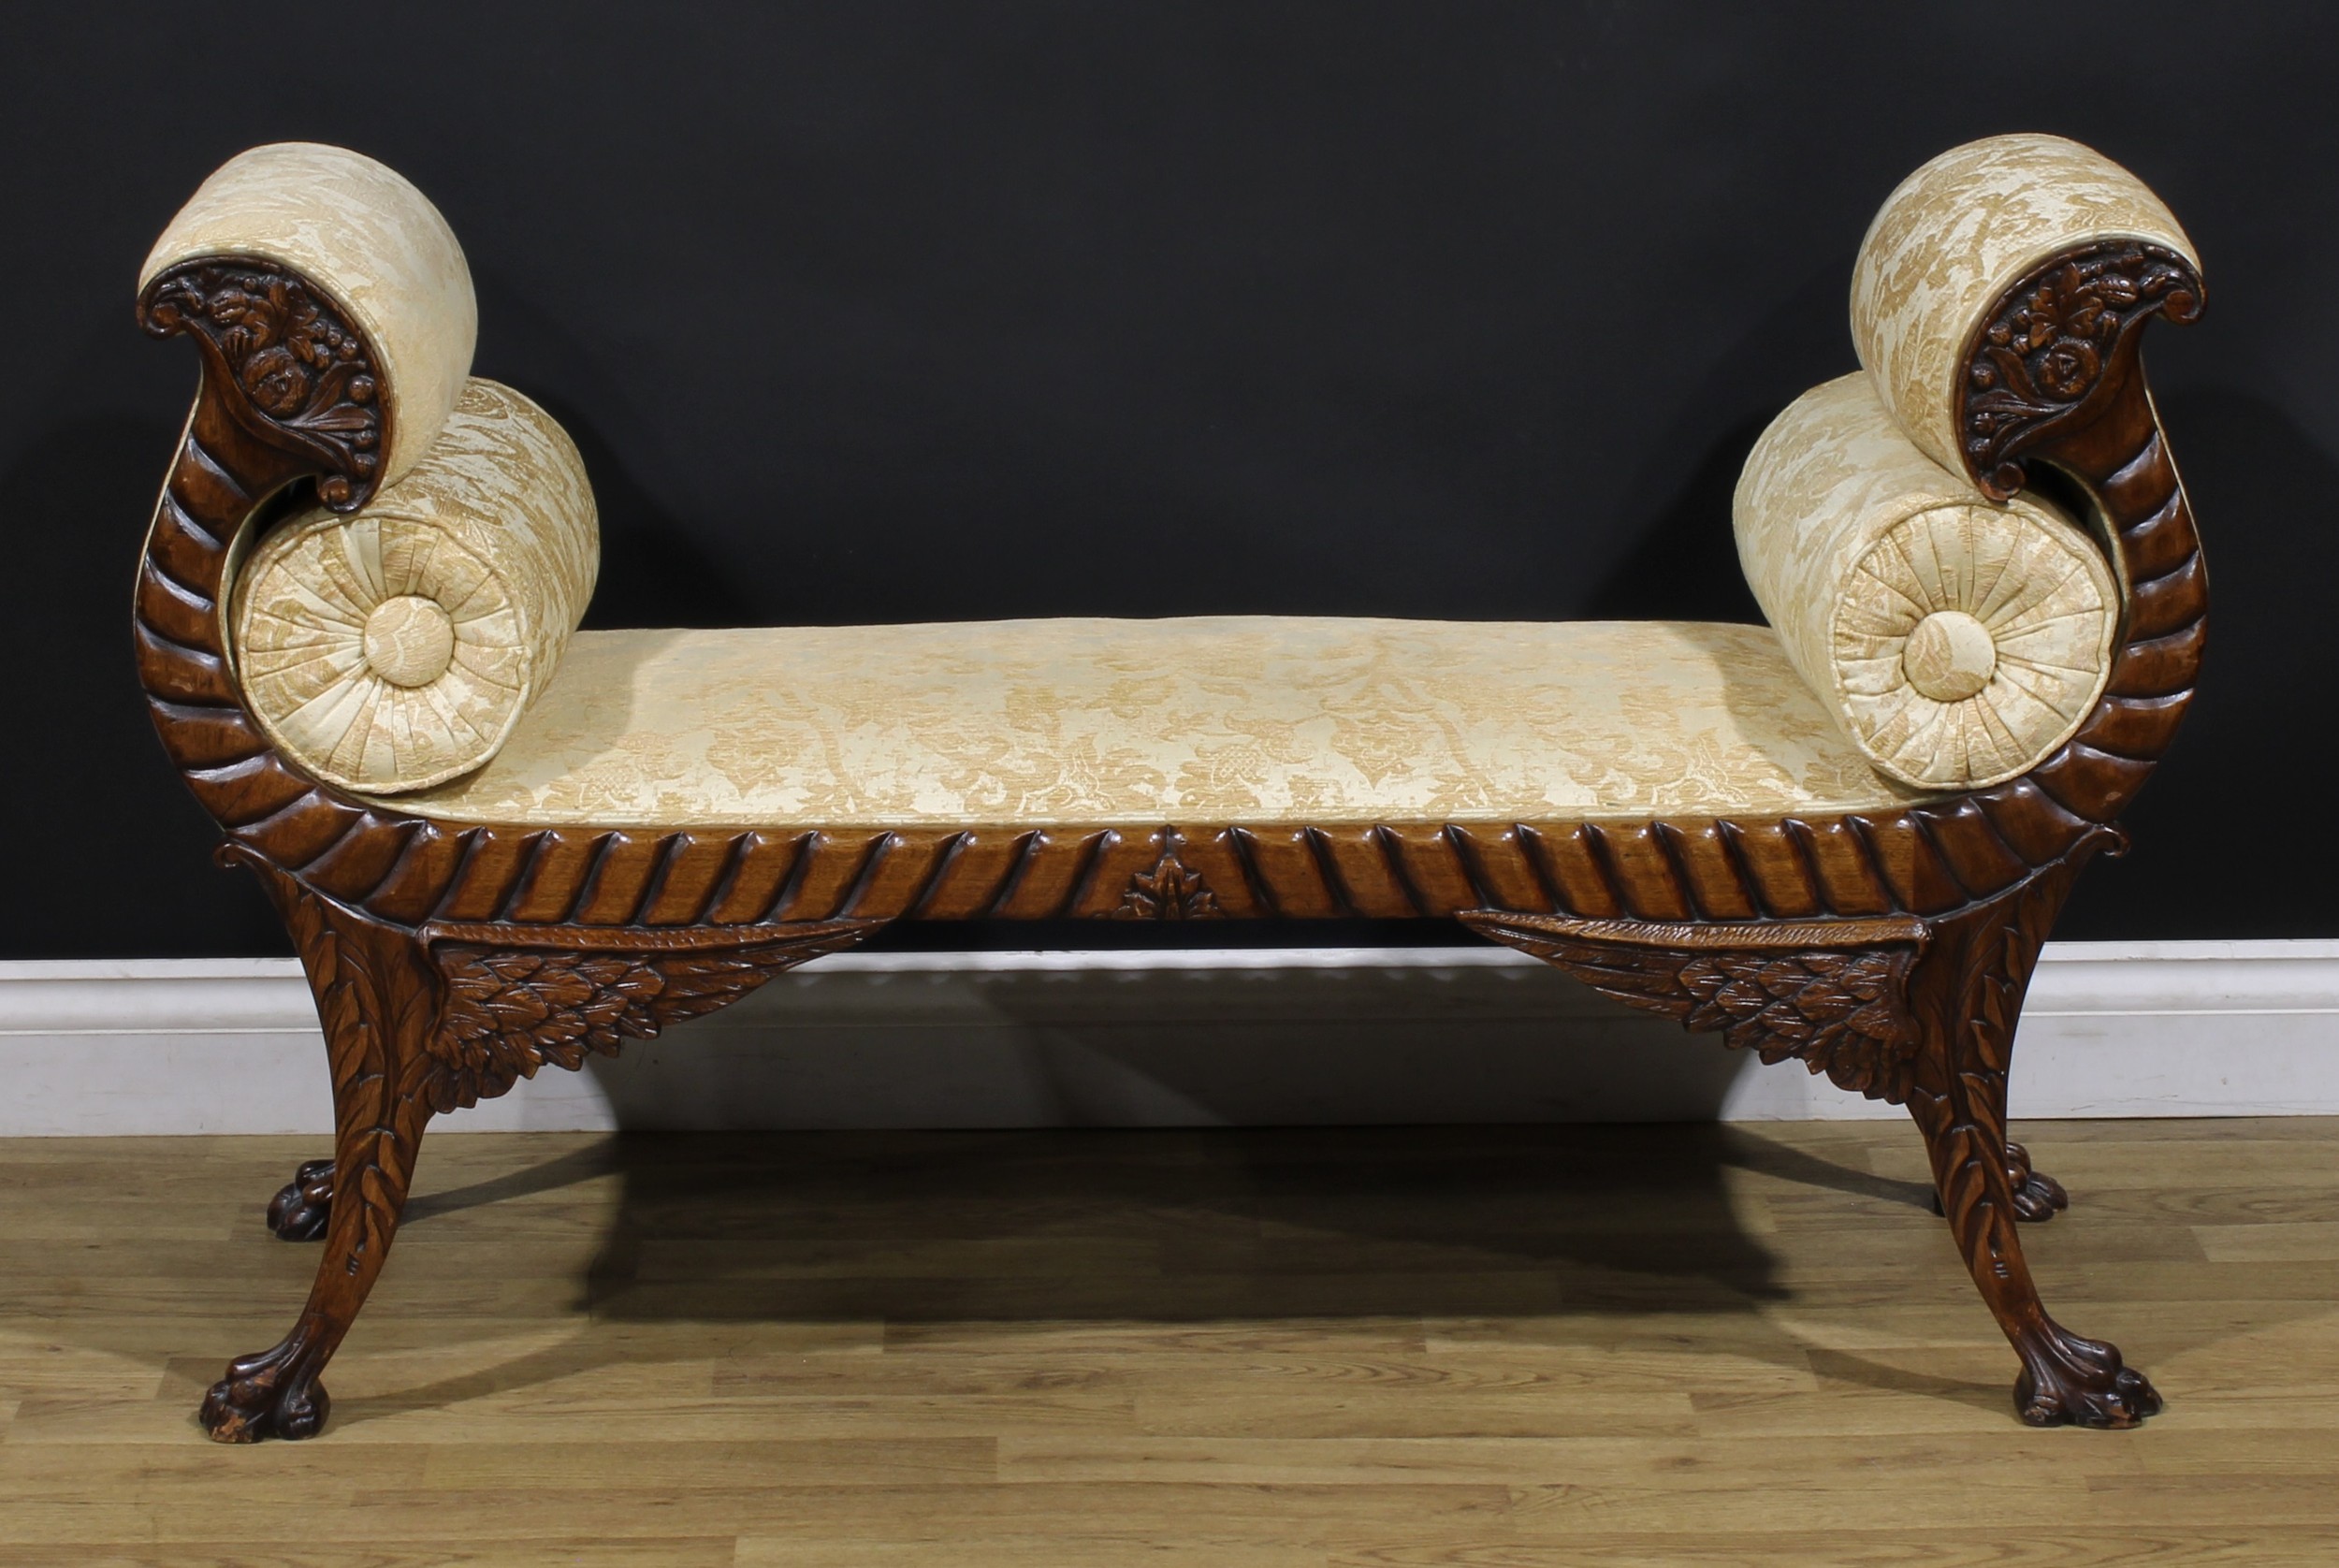 An American Empire Revival neoclassical mahogany window seat, Récamier-form arms carved as